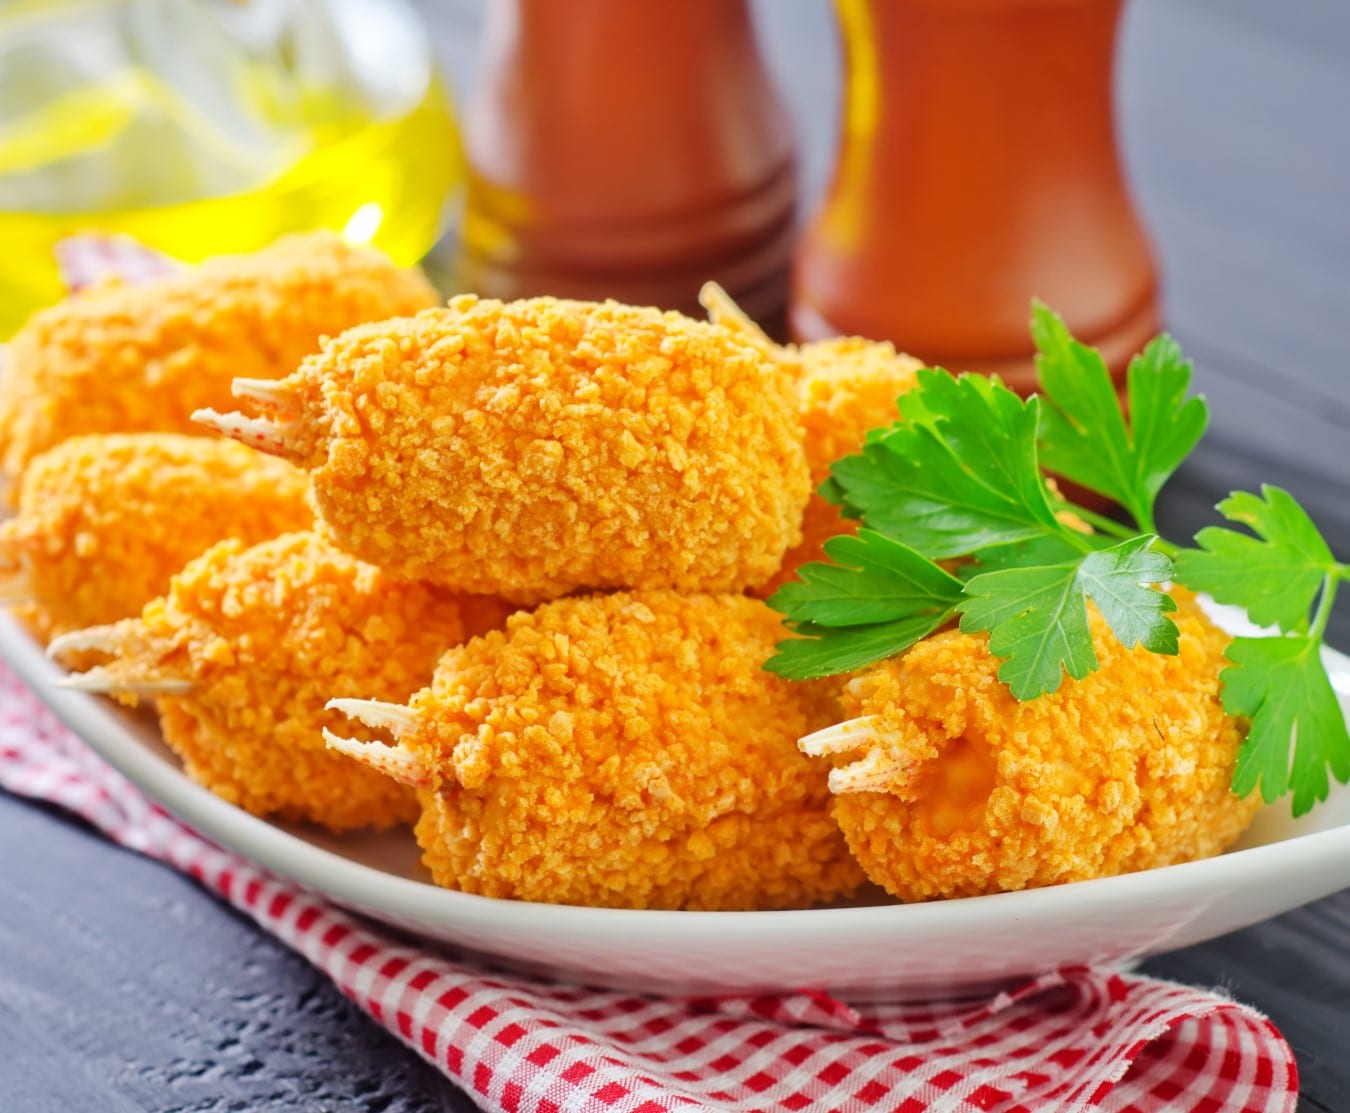 Buy Breaded Crab Claws 1kg Online at the Best Price, Free UK Delivery ...